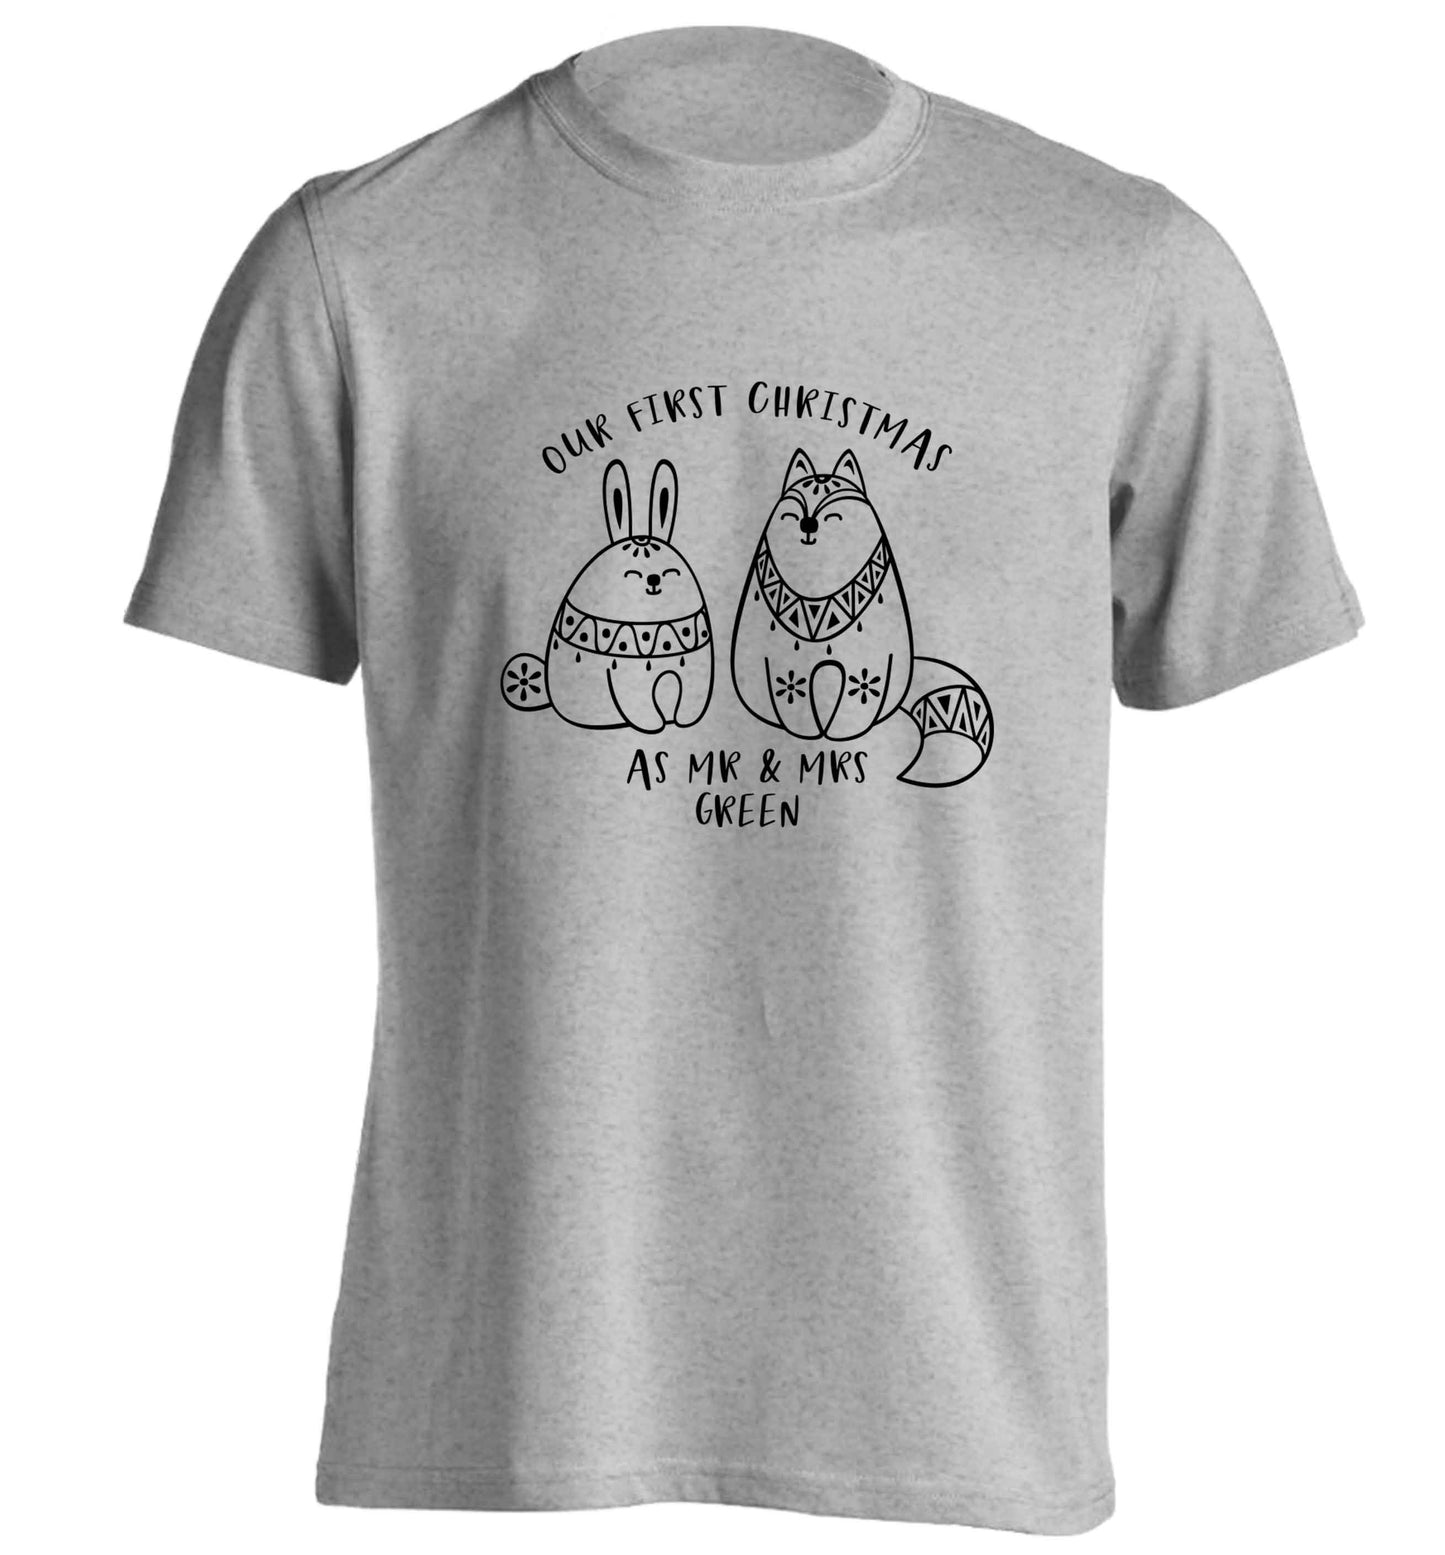 Our first Christmas as Mr & Mrs personalised adults unisex grey Tshirt 2XL